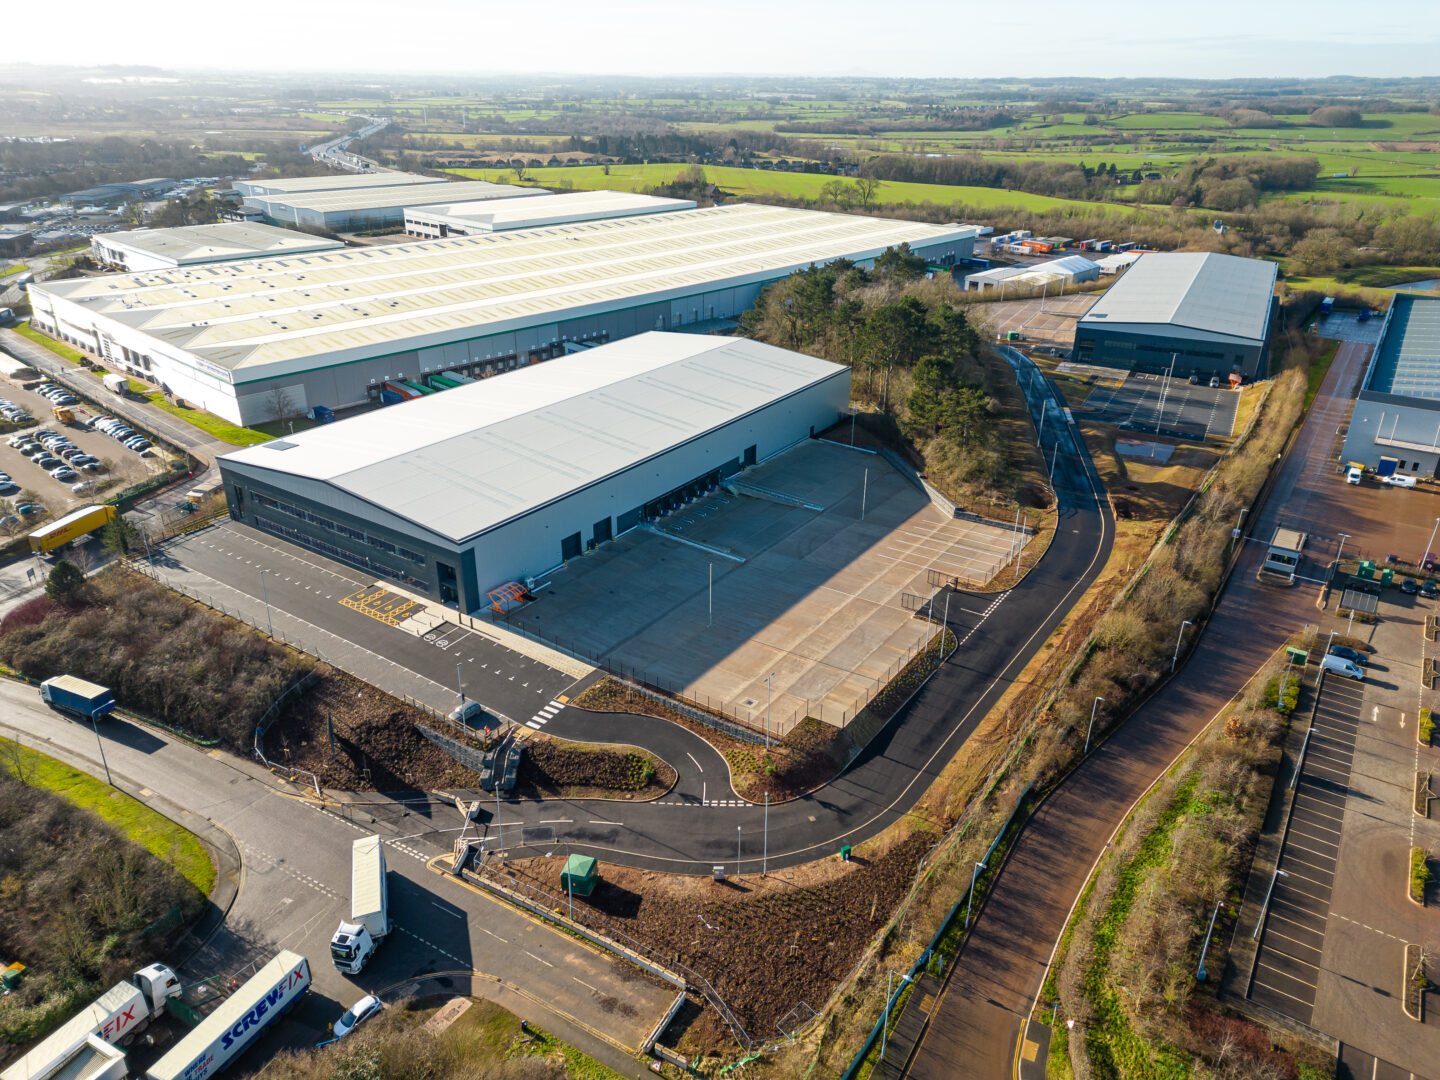 Ergo announces successful letting of 77,000 sq.ft of prime industrial space in Stafford to global food testing firm FDL #industrynews